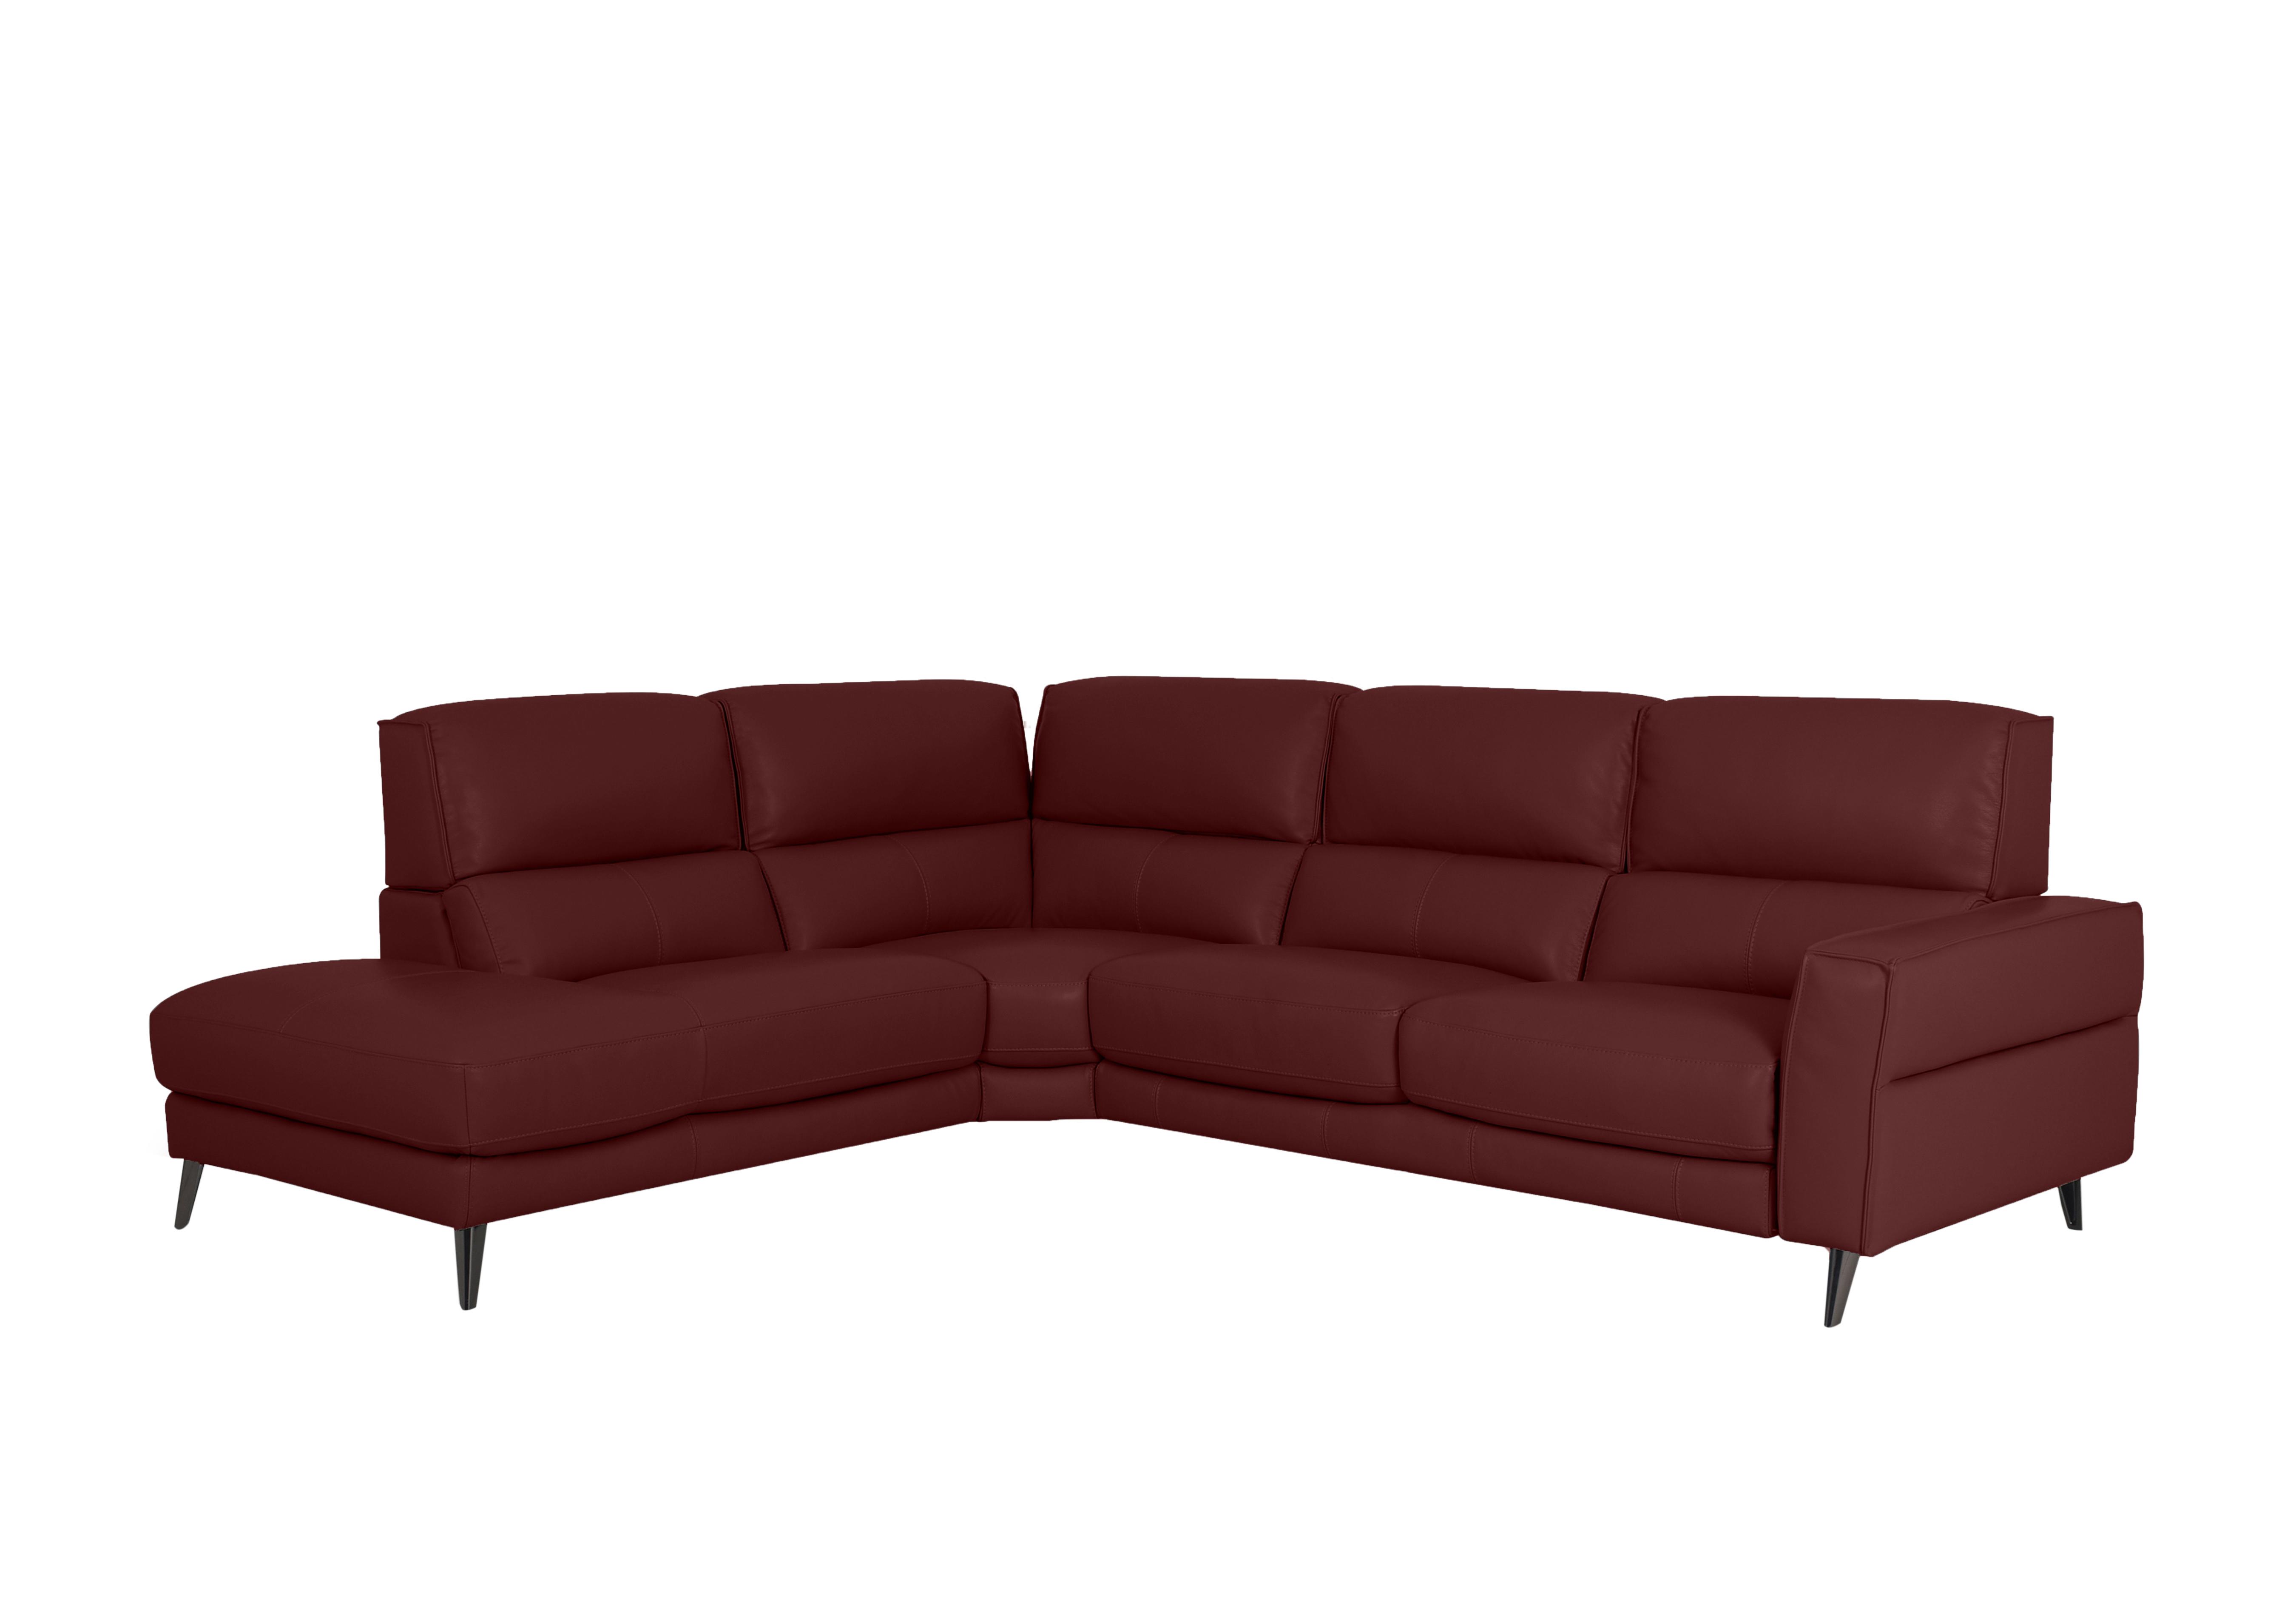 Axel Leather Chaise End Sofa in Bv-035c Deep Red on Furniture Village